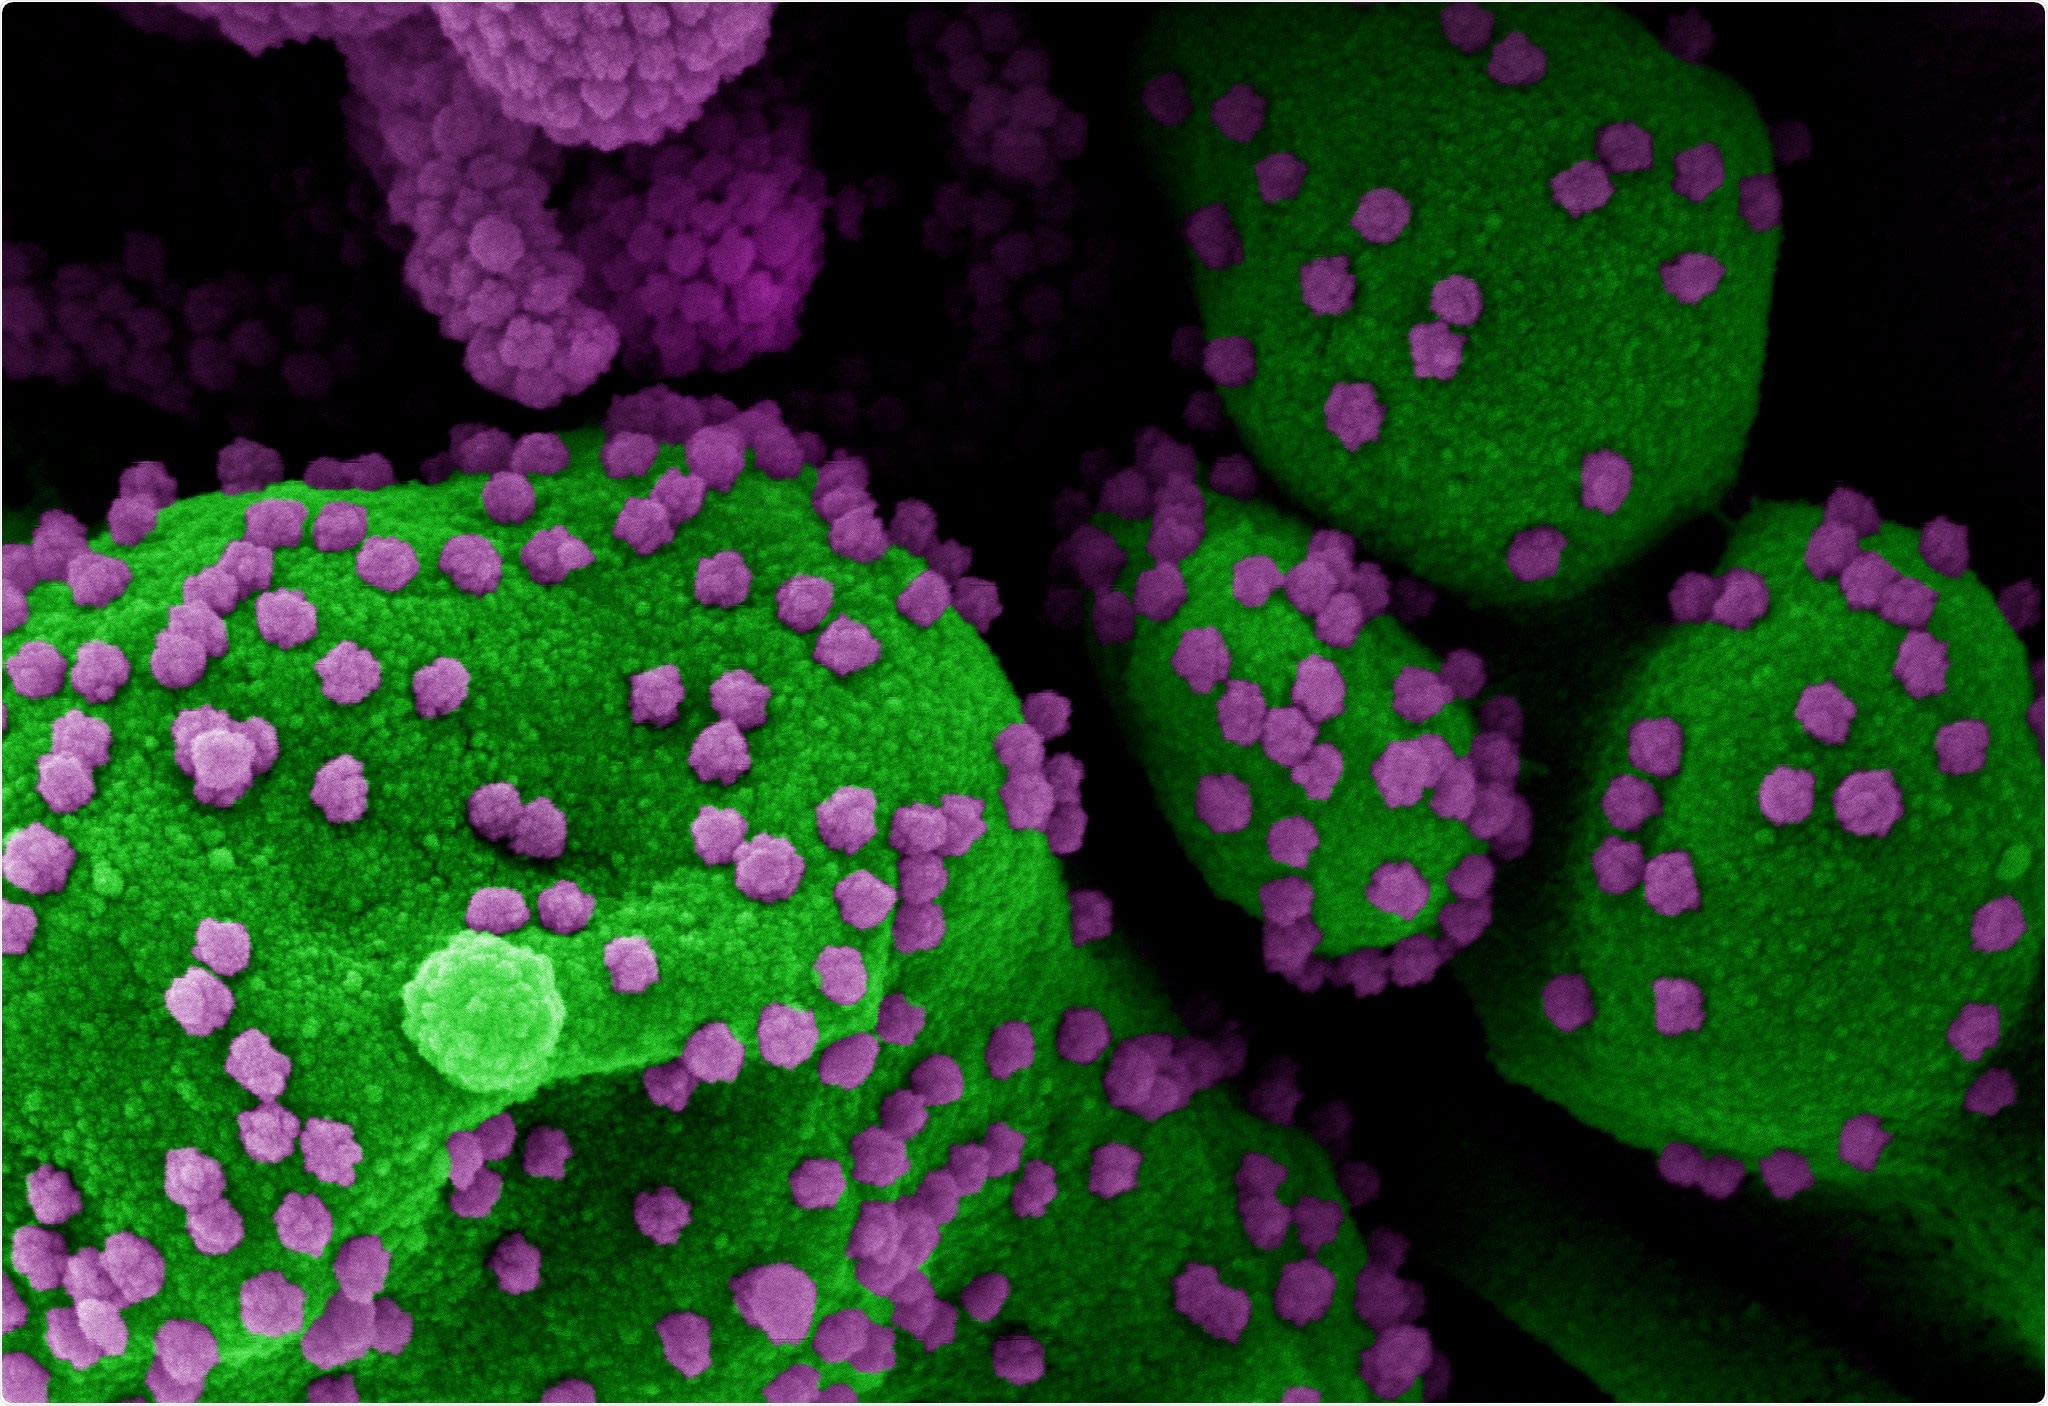 Novel Coronavirus SARS-CoV-2 Colorized scanning electron micrograph of an apoptotic cell (green) heavily infected with SARS-CoV-2 virus particles (purple), isolated from a patient sample. Image at the NIAID Integrated Research Facility (IRF) in Fort Detrick, Maryland. Credit: NIAID